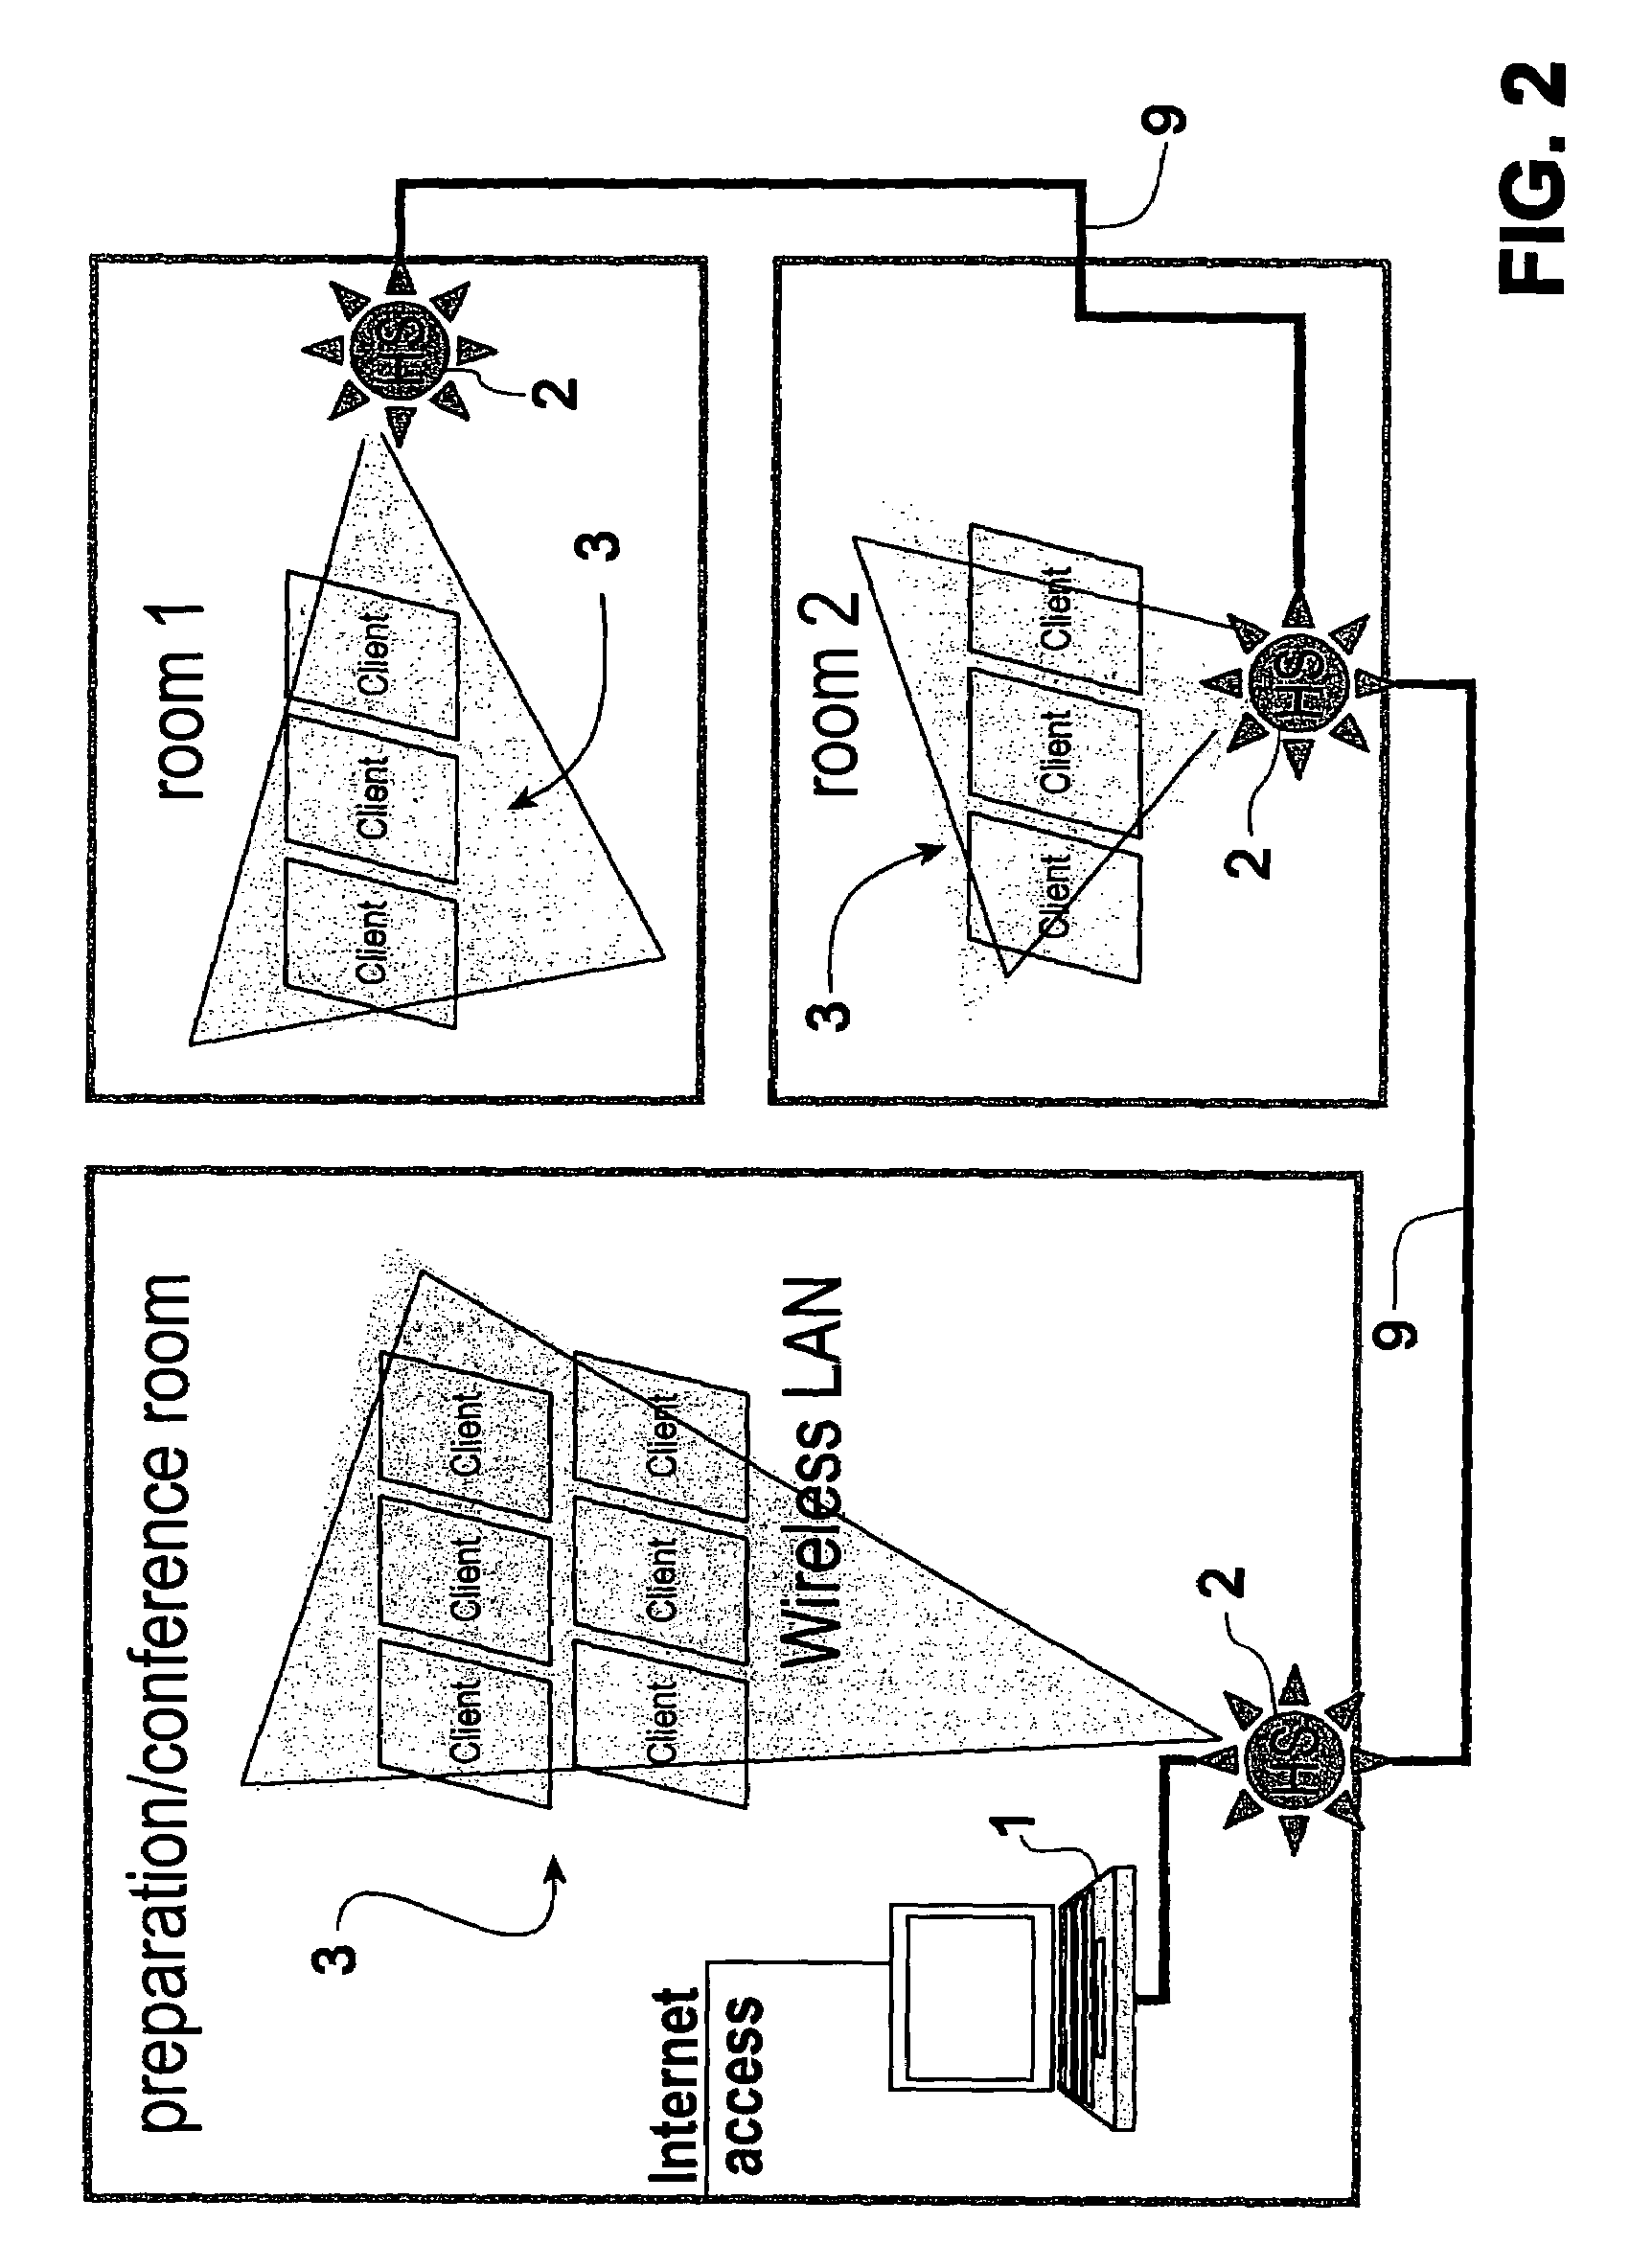 Method and system for recording the results of a psychological test